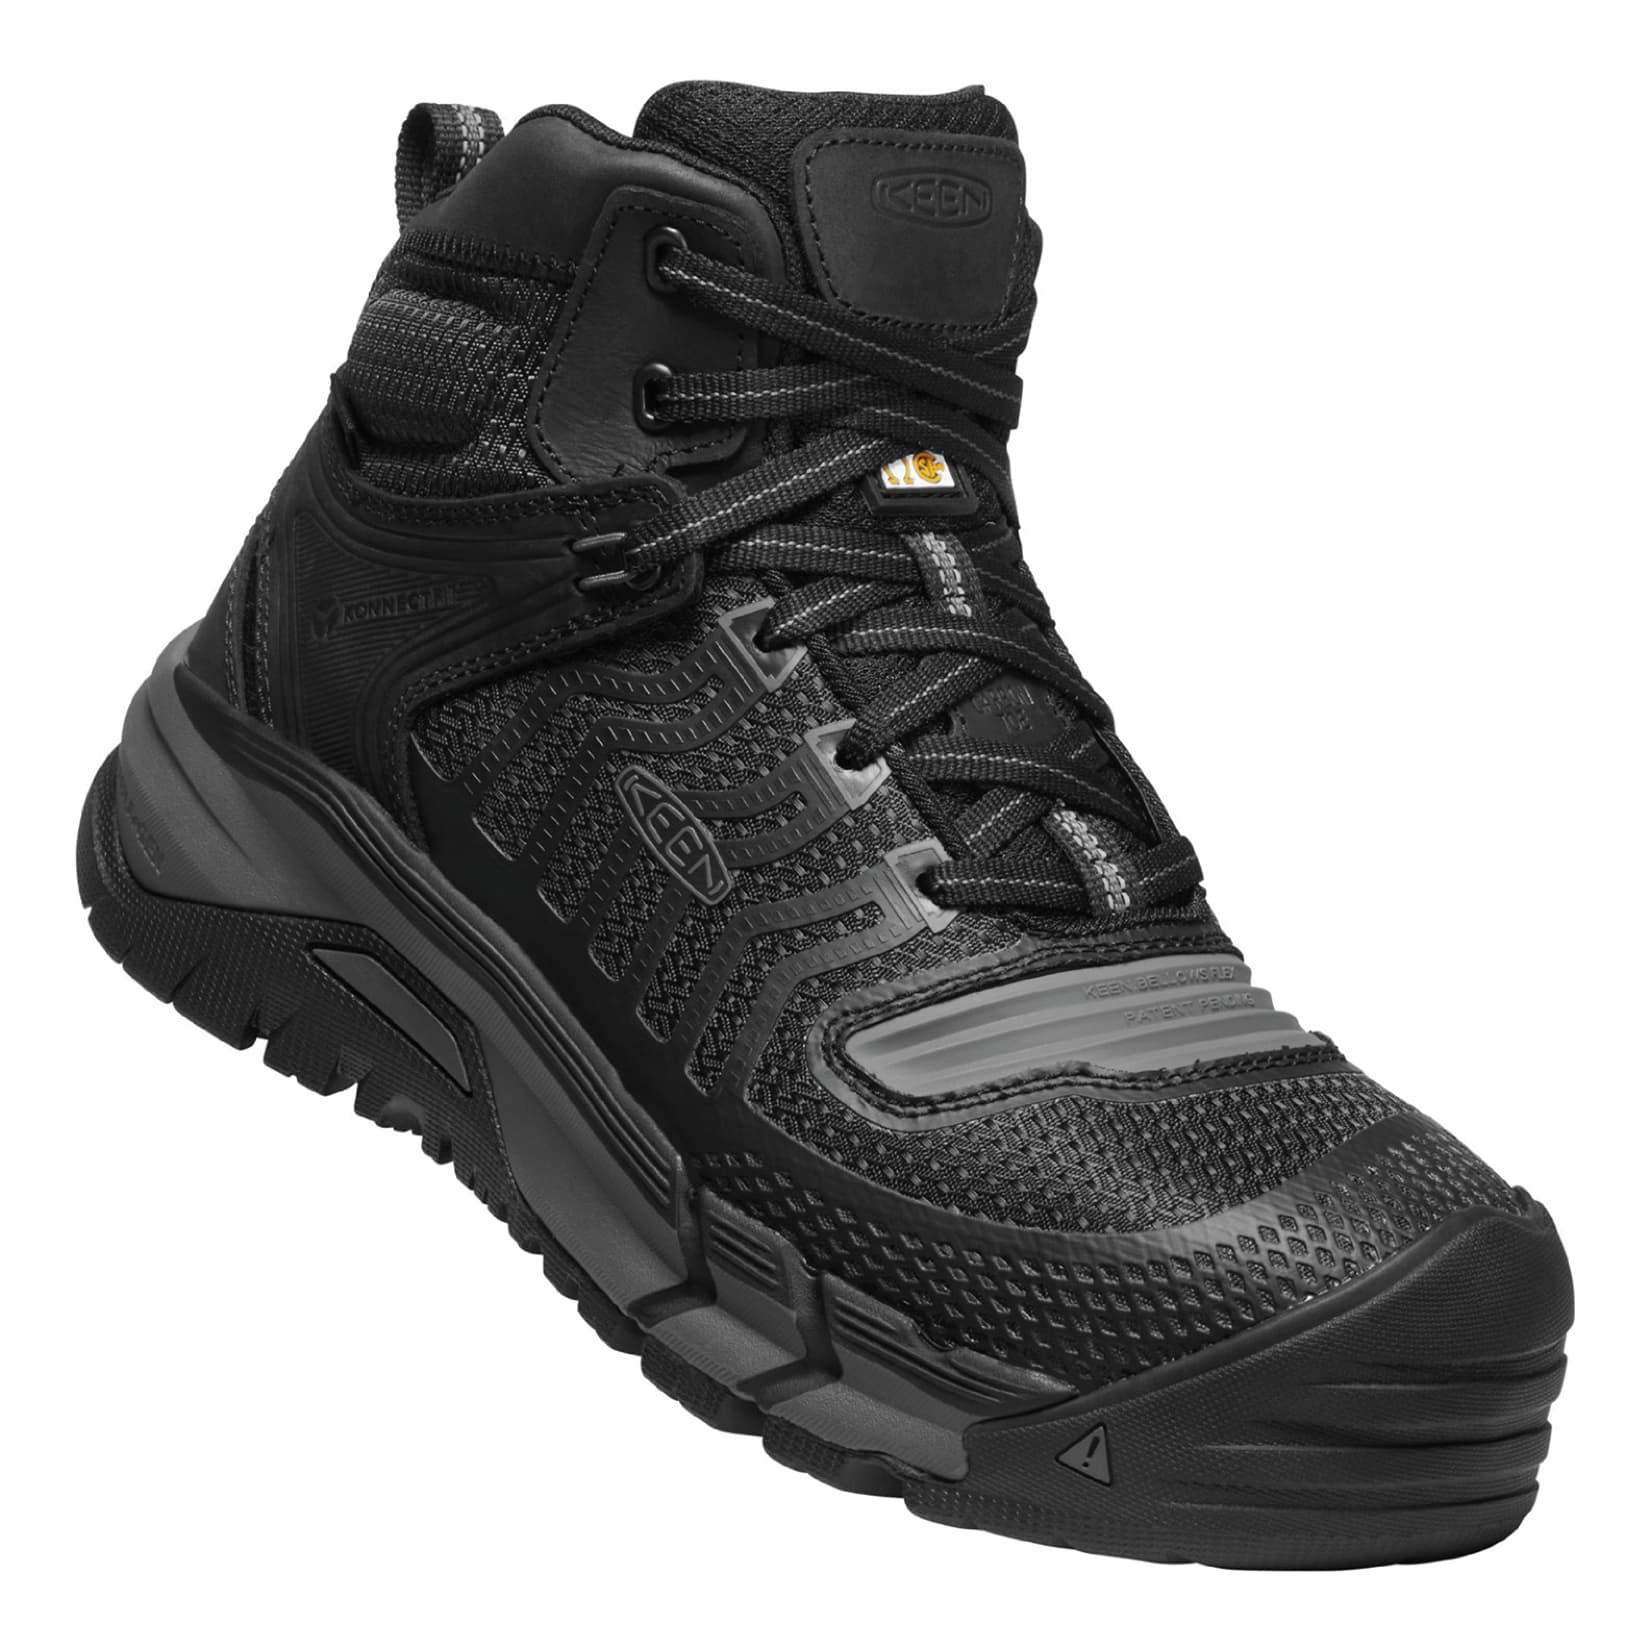 Under Armour Stellar Tac Review (Cheap Tactical Boots) 